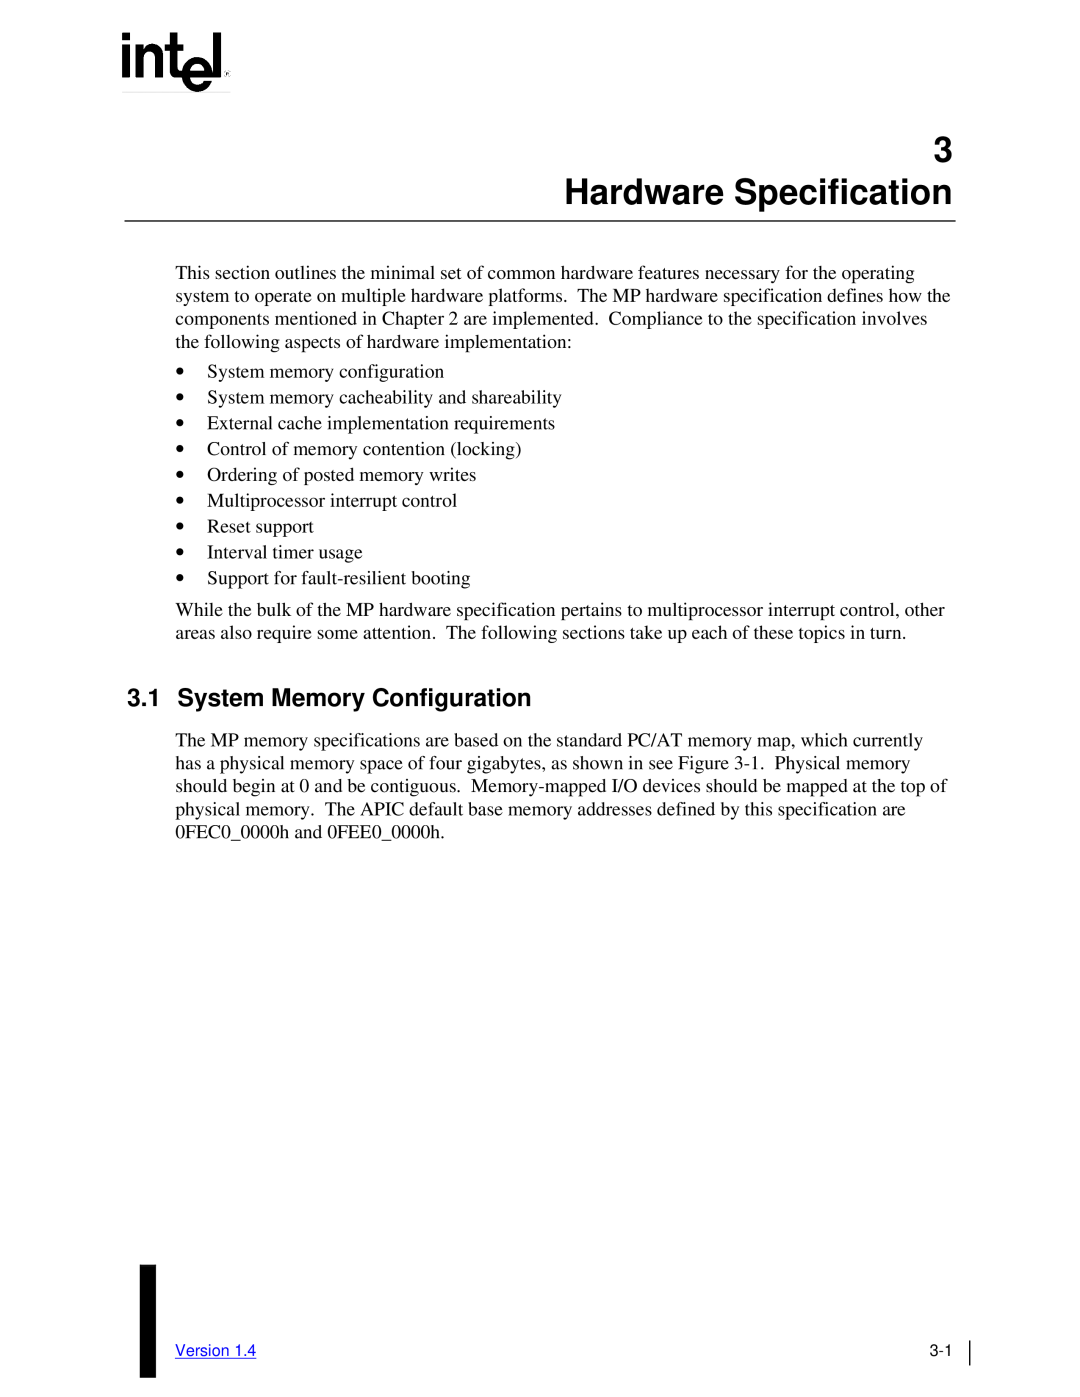 Intel MultiProcessor manual Hardware Specification, System Memory Configuration 